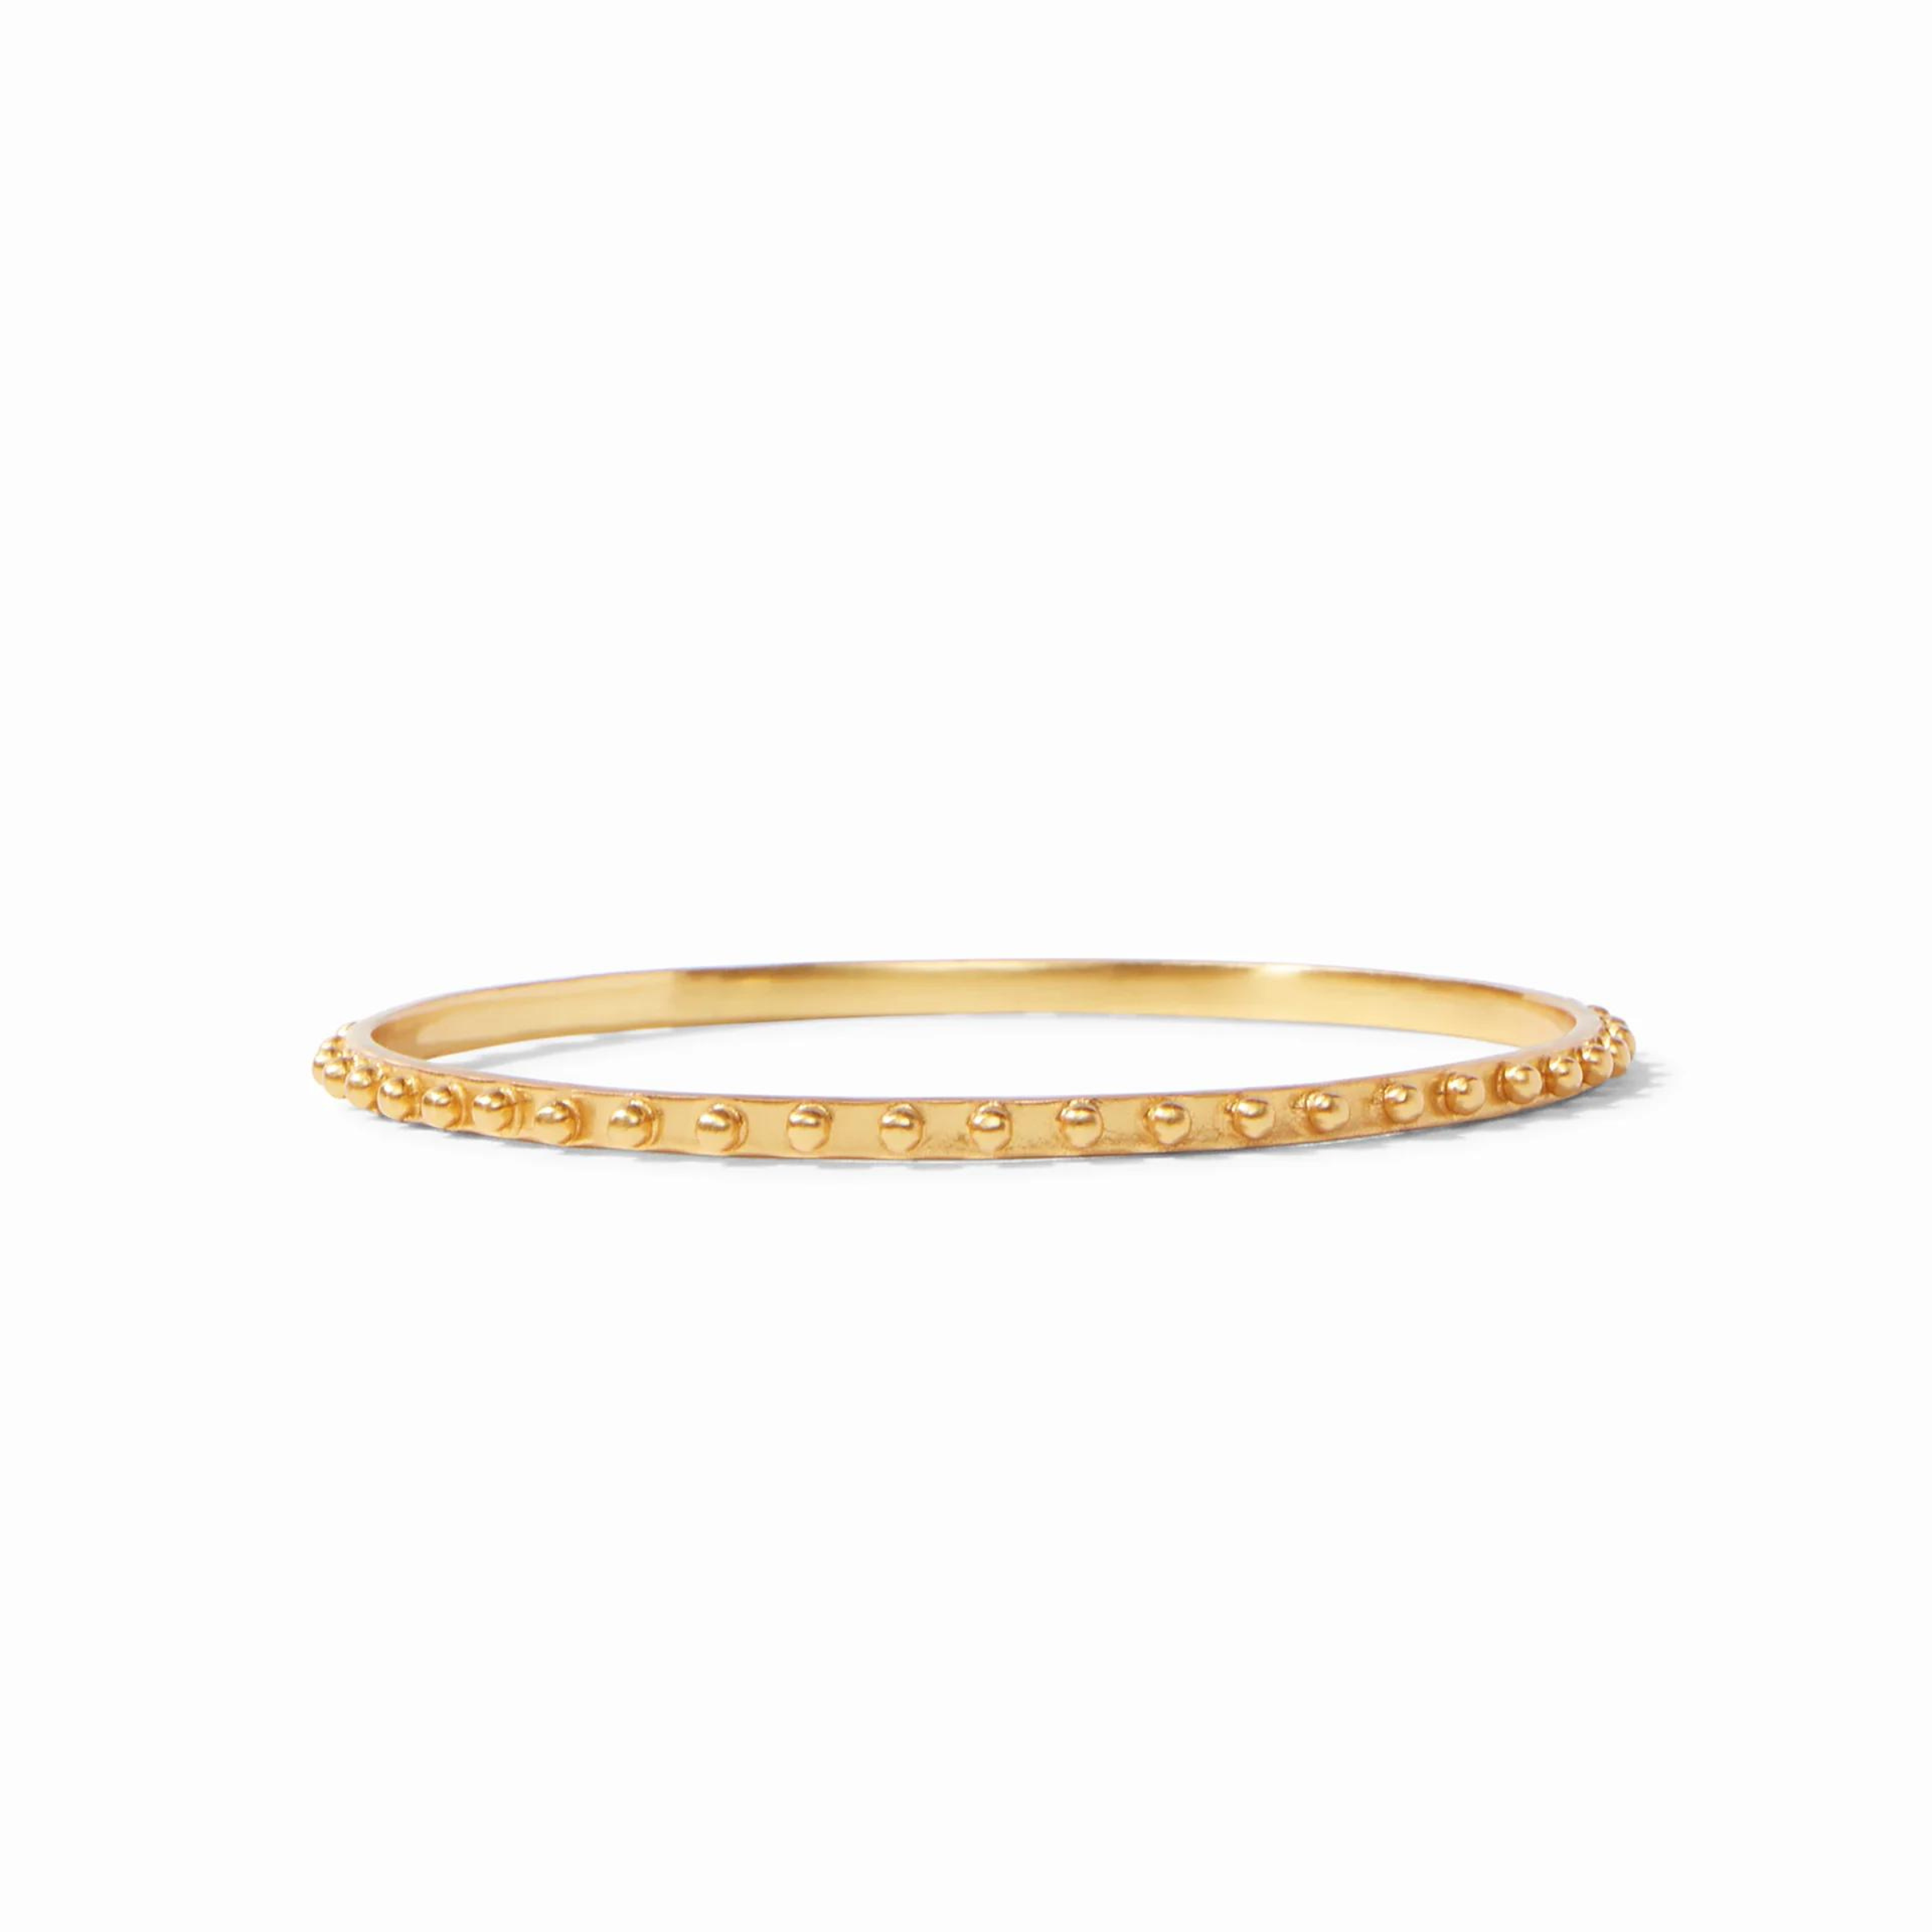 Gold bangle pictured on a white background. 